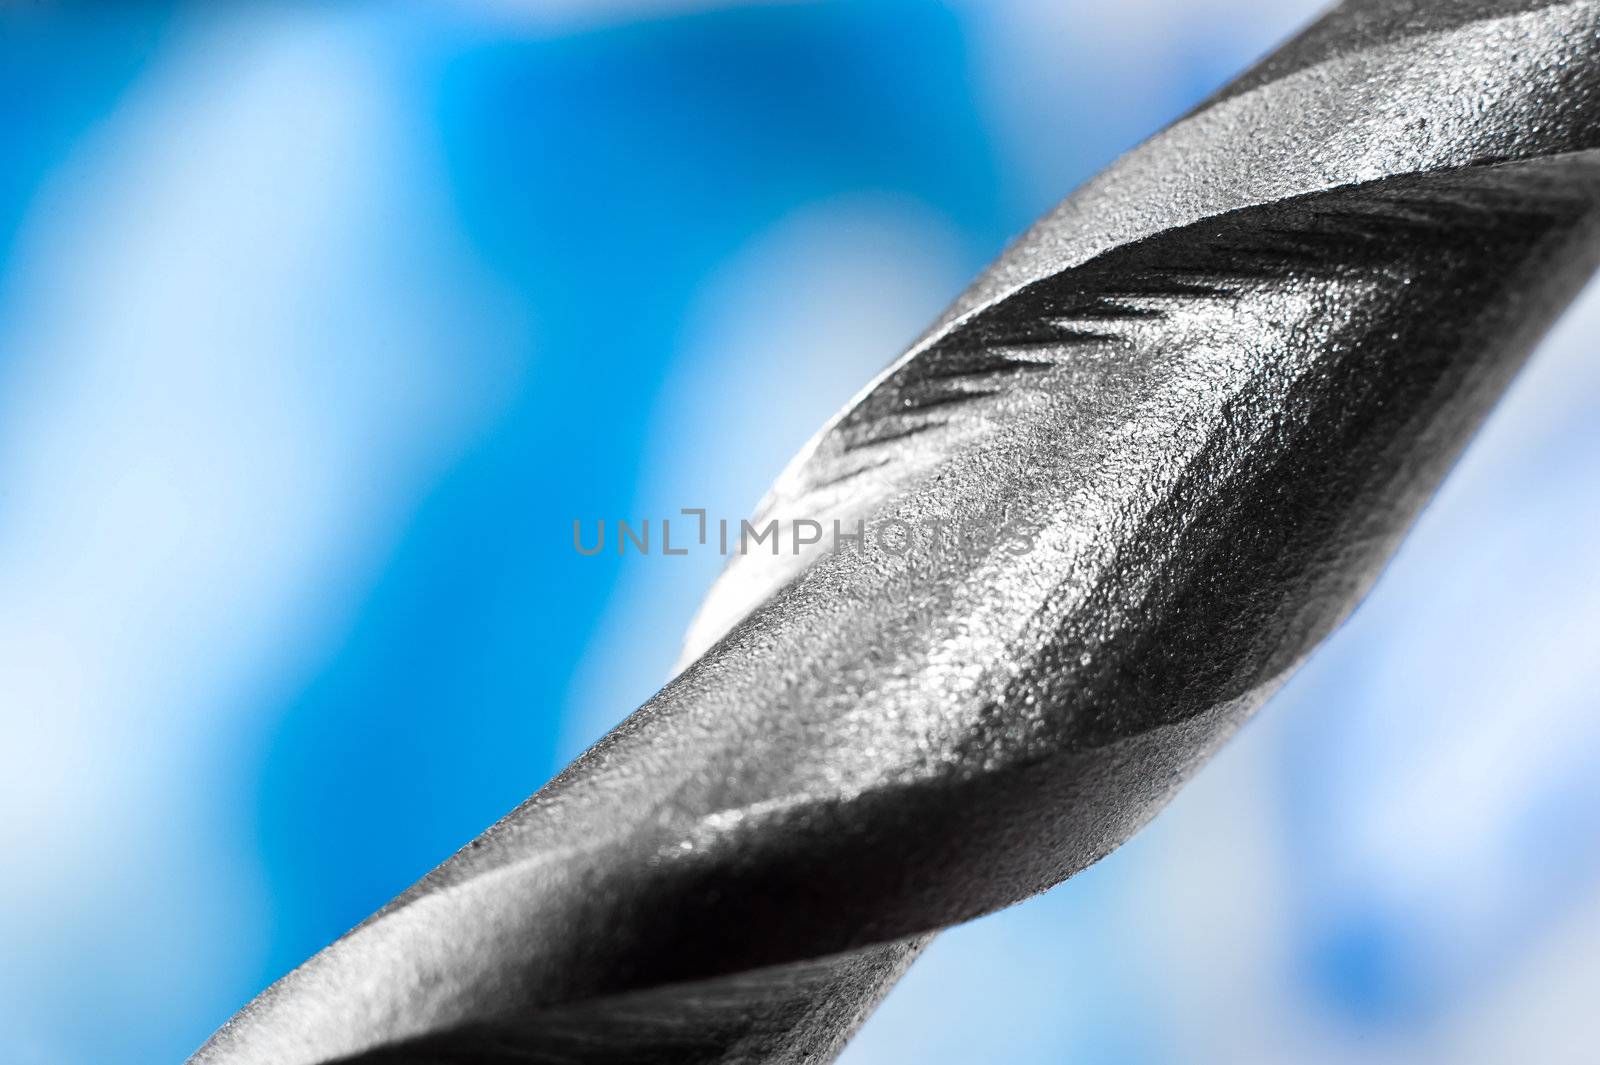 macro closeup of a metal drilling bit on blue background